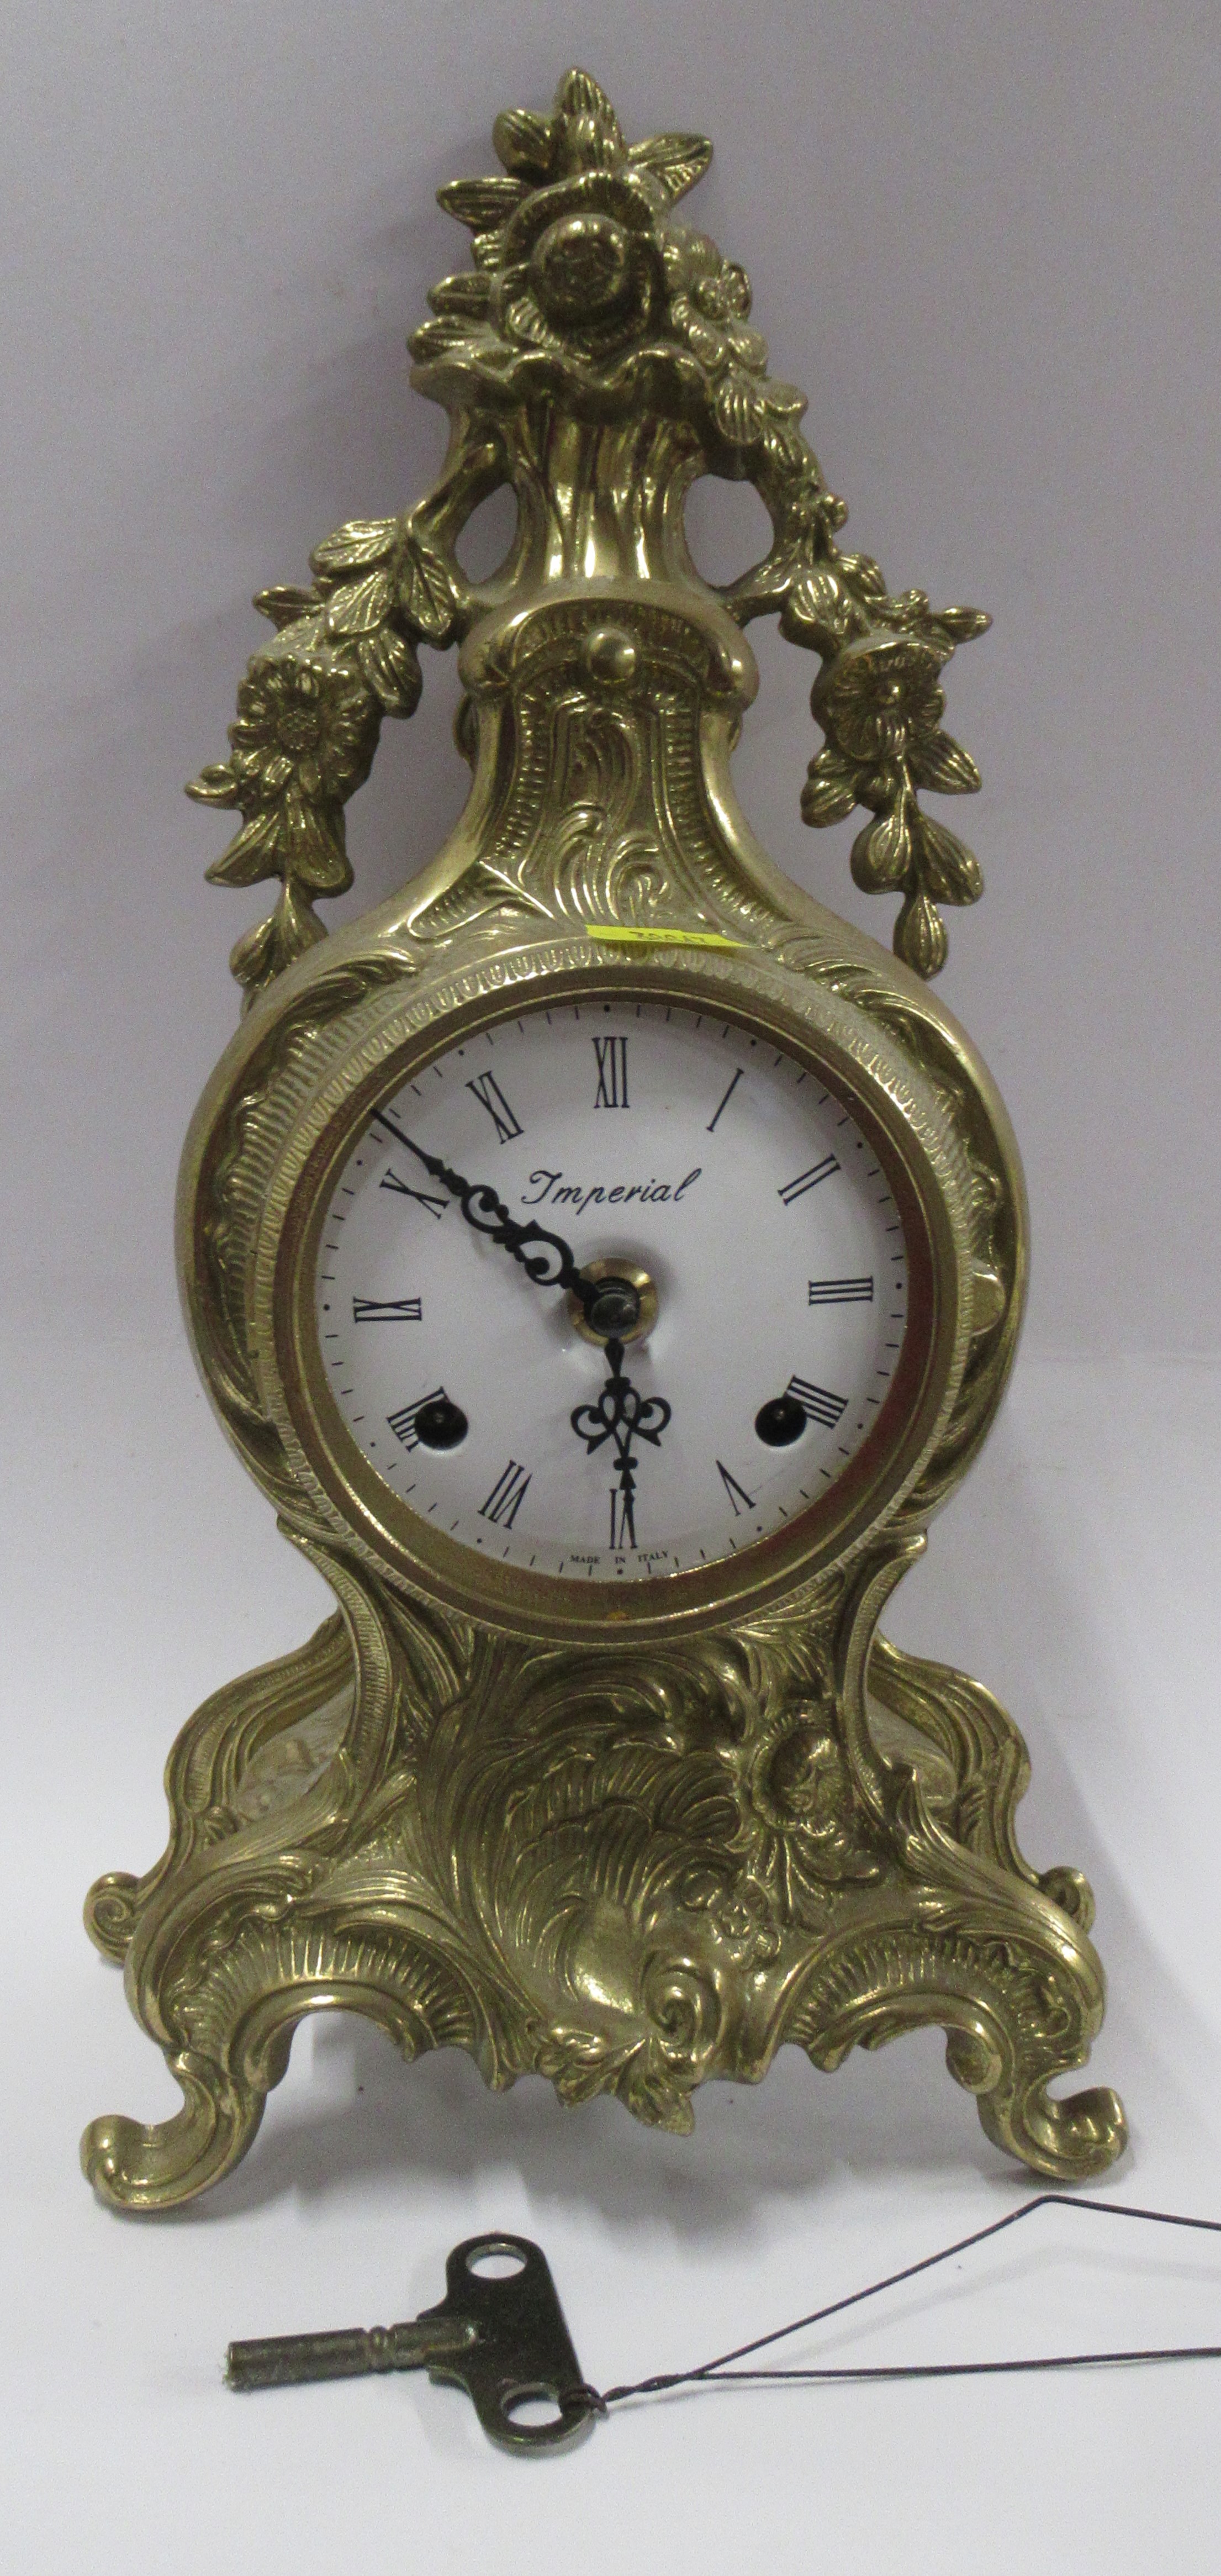 A 19th century marble cased mantel clock, with gilt metal urn and swag decoration, height 10.5ins - Image 3 of 3